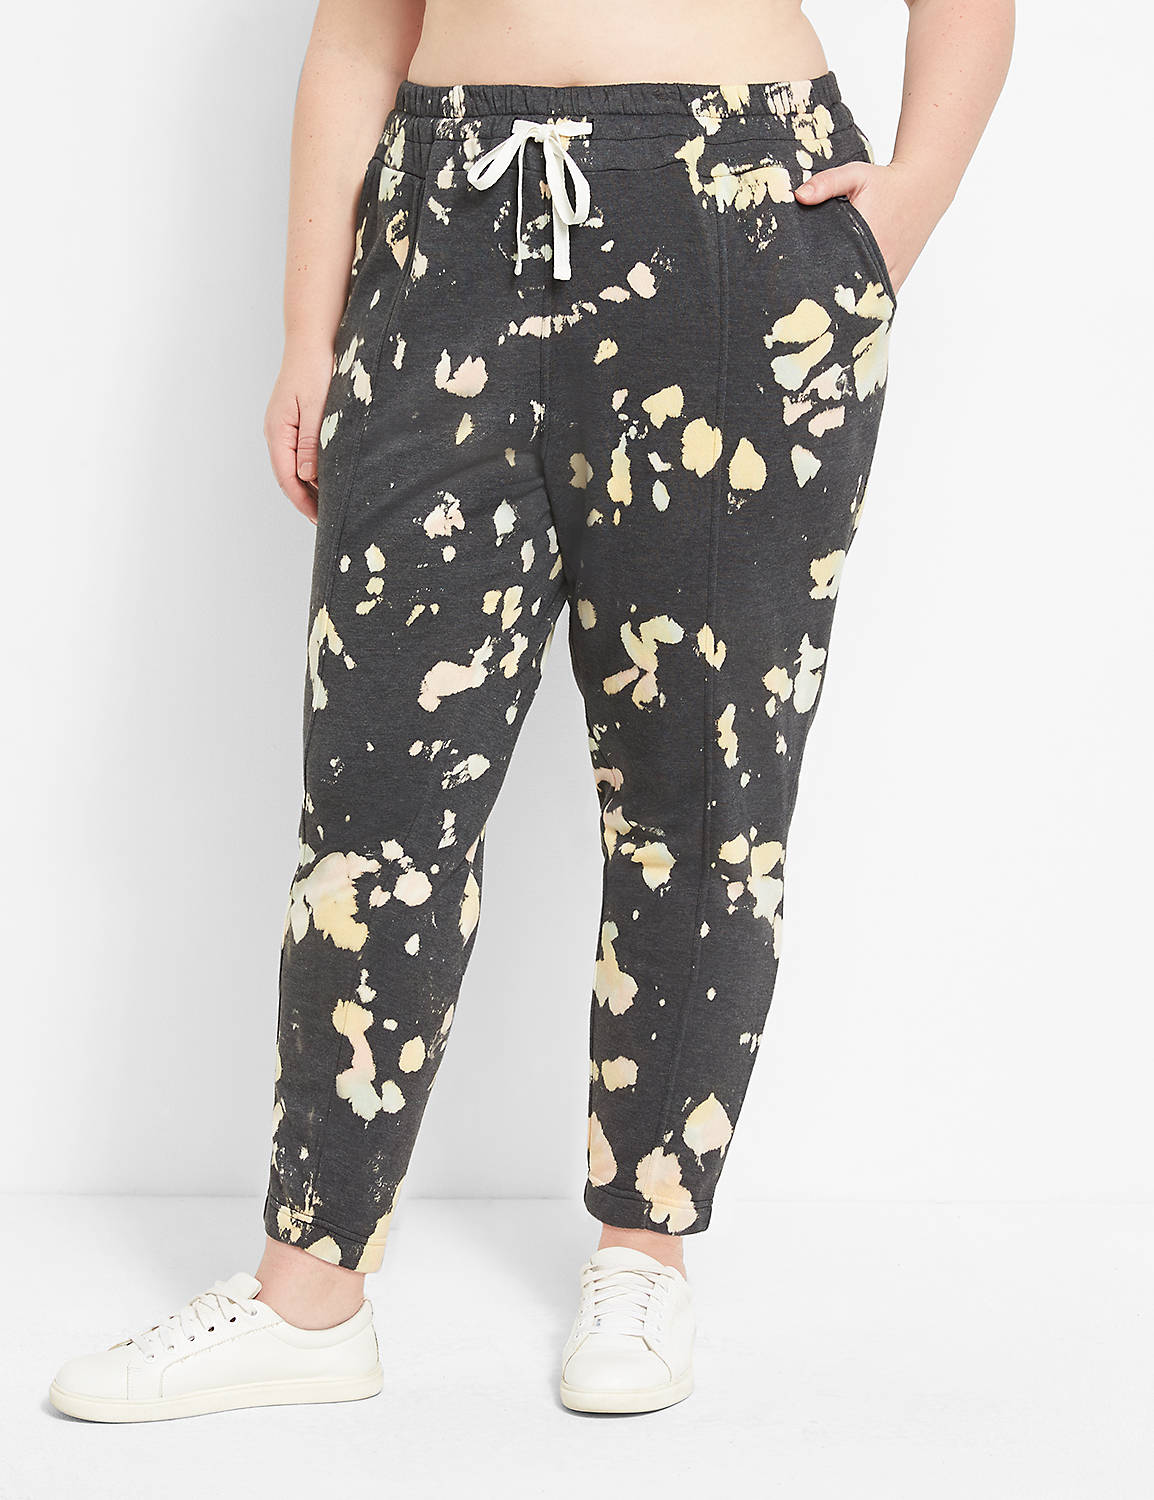 LIVI Mid Rise French Terry Ankle Length Jogger S 1123777:Ascena Black:10/12 Product Image 1